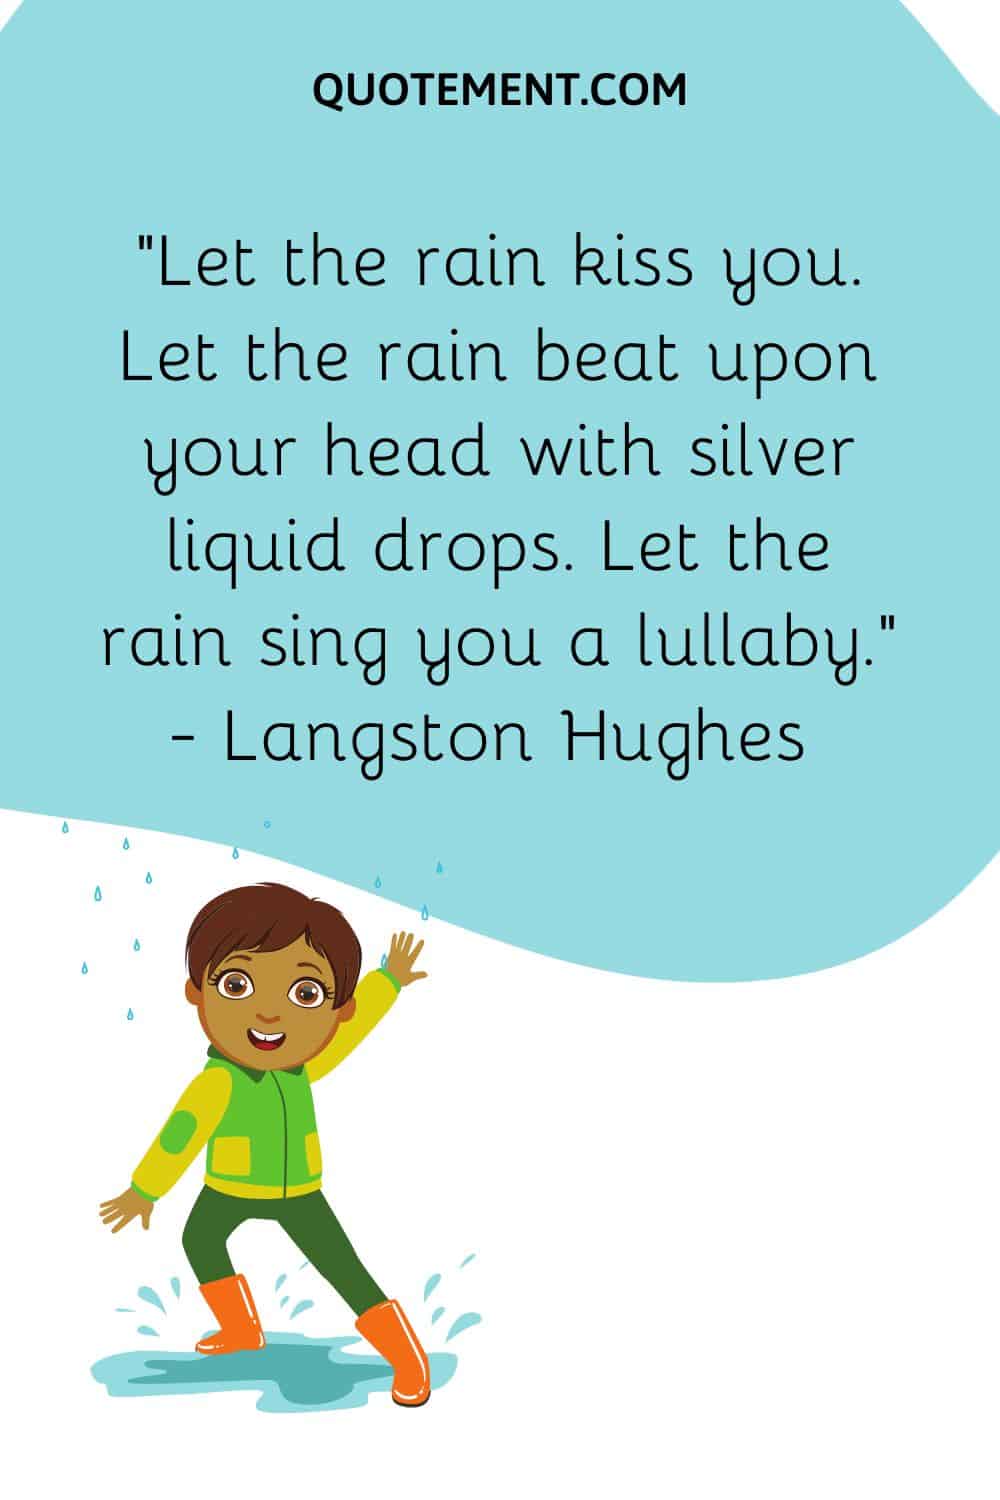 Let the rain kiss you. Let the rain beat upon your head with silver liquid drops